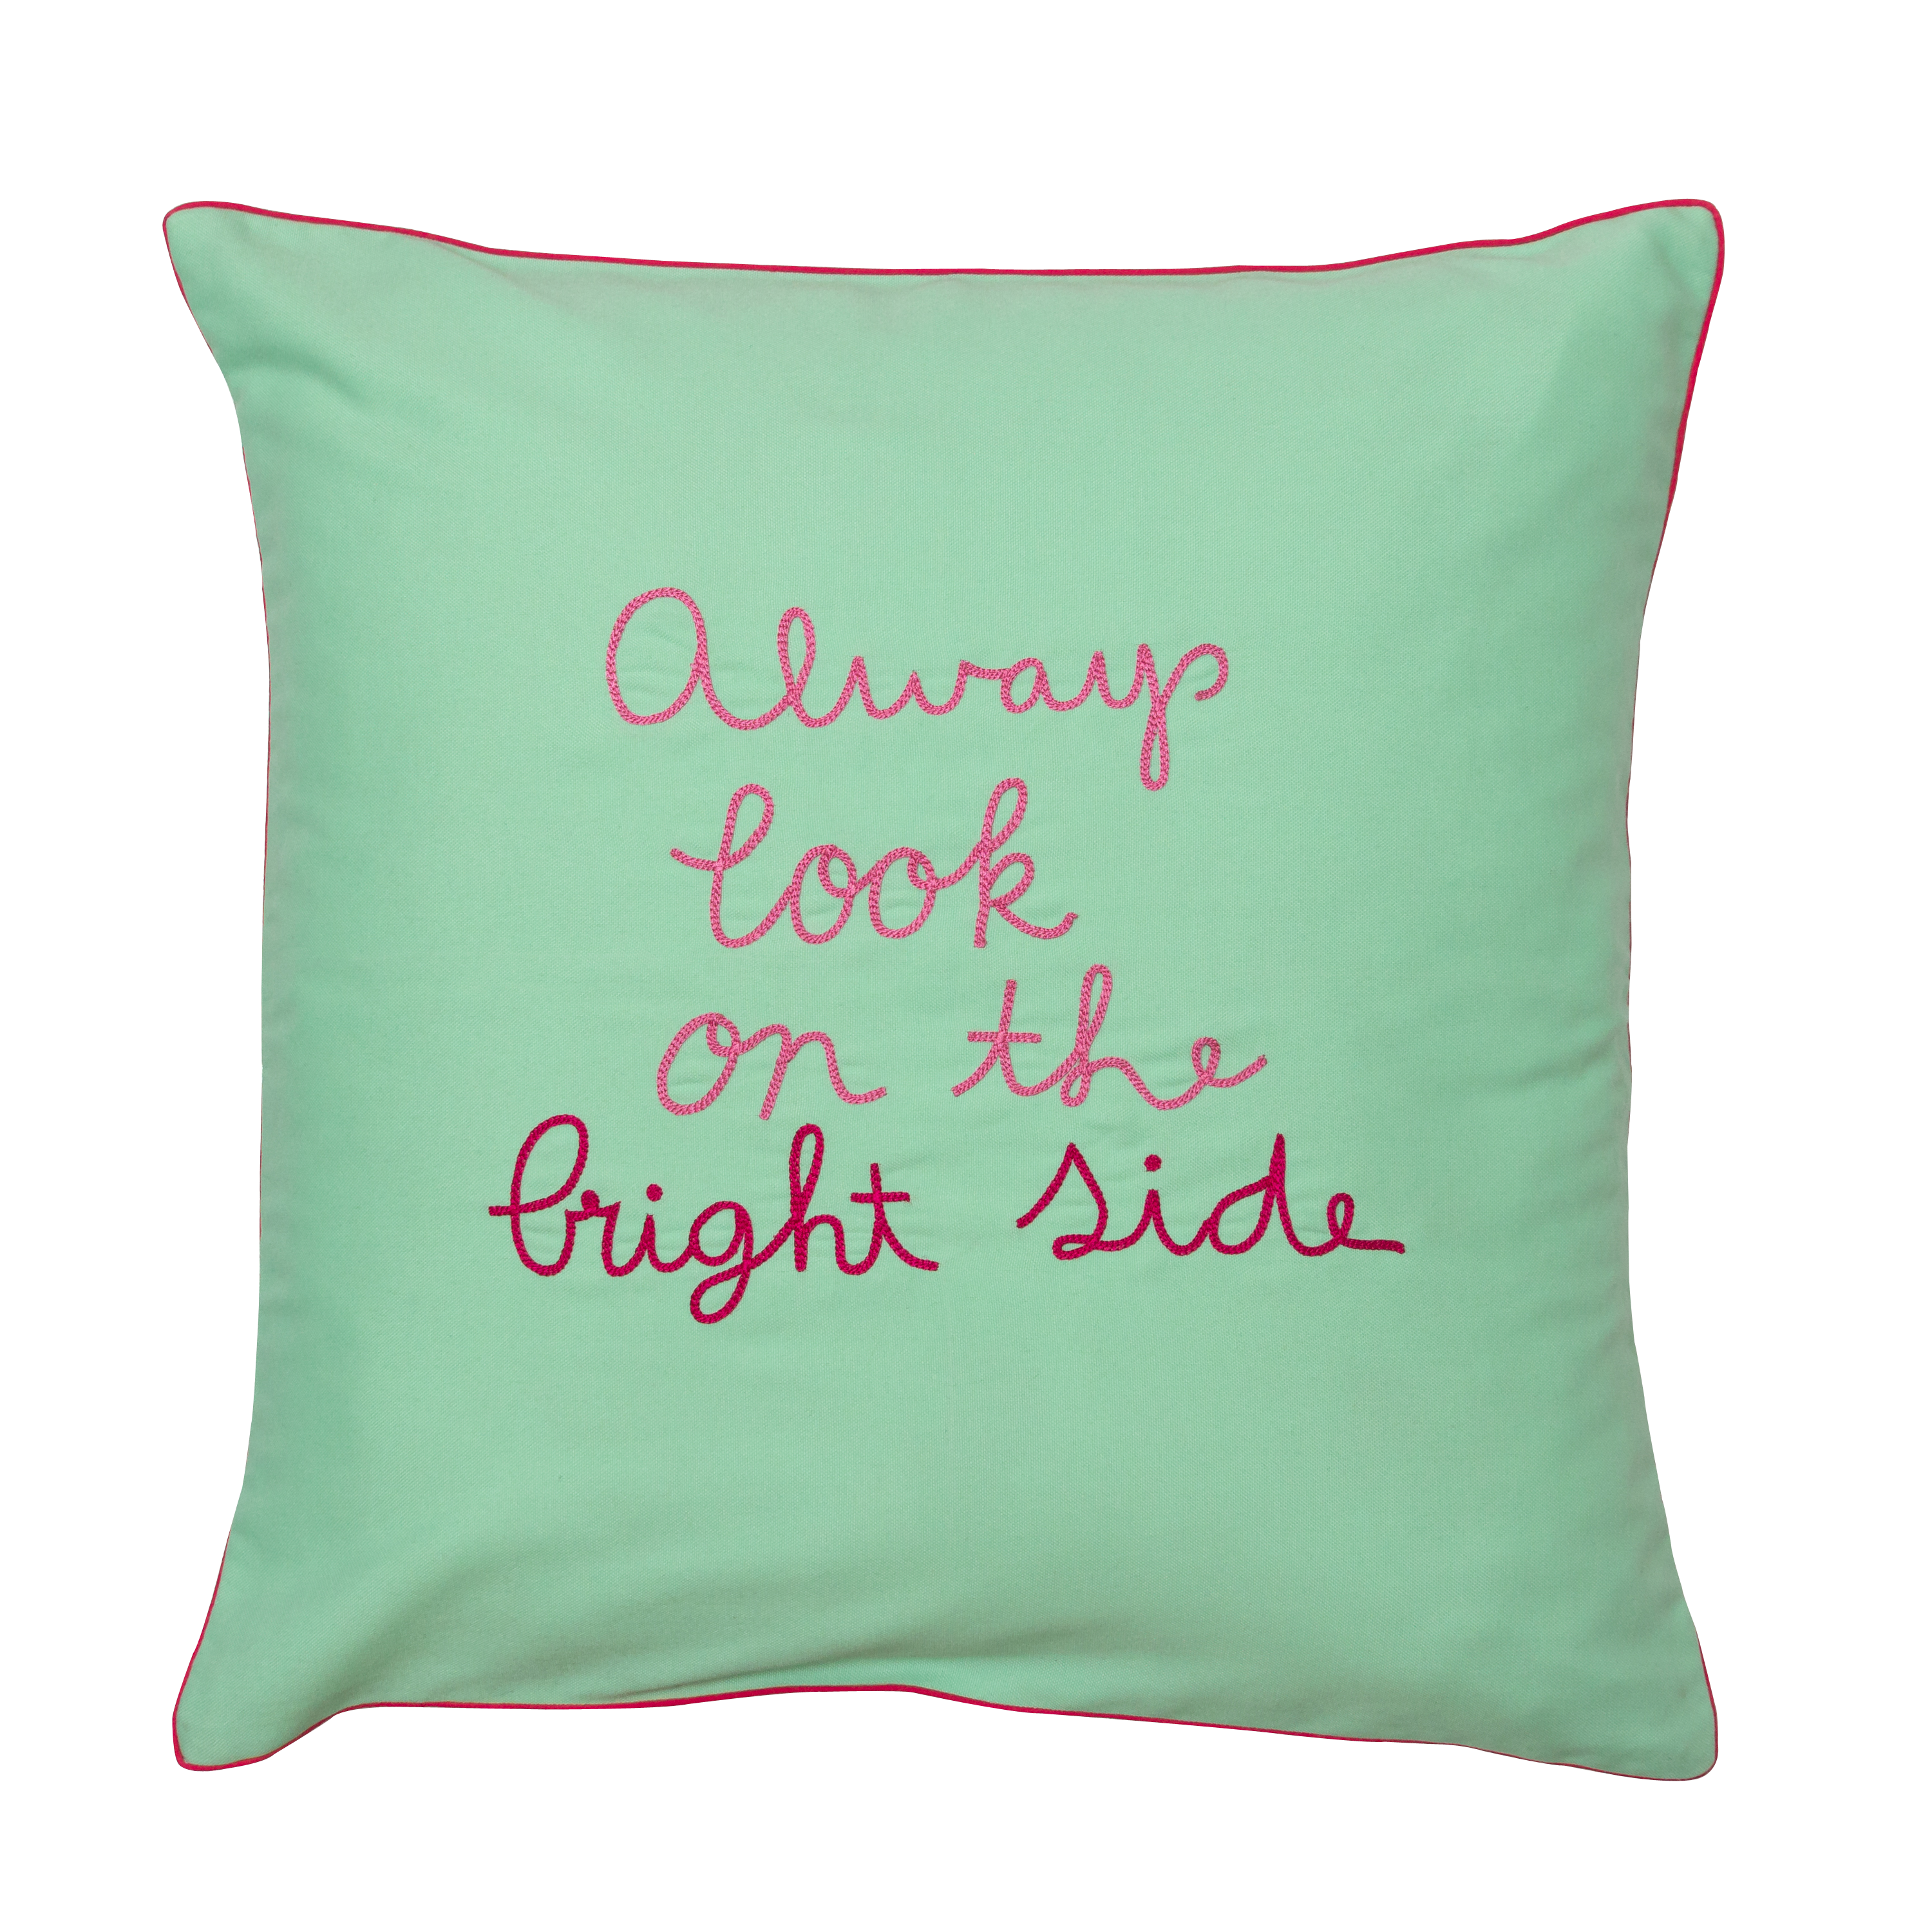 Bright Side Cushion Cover